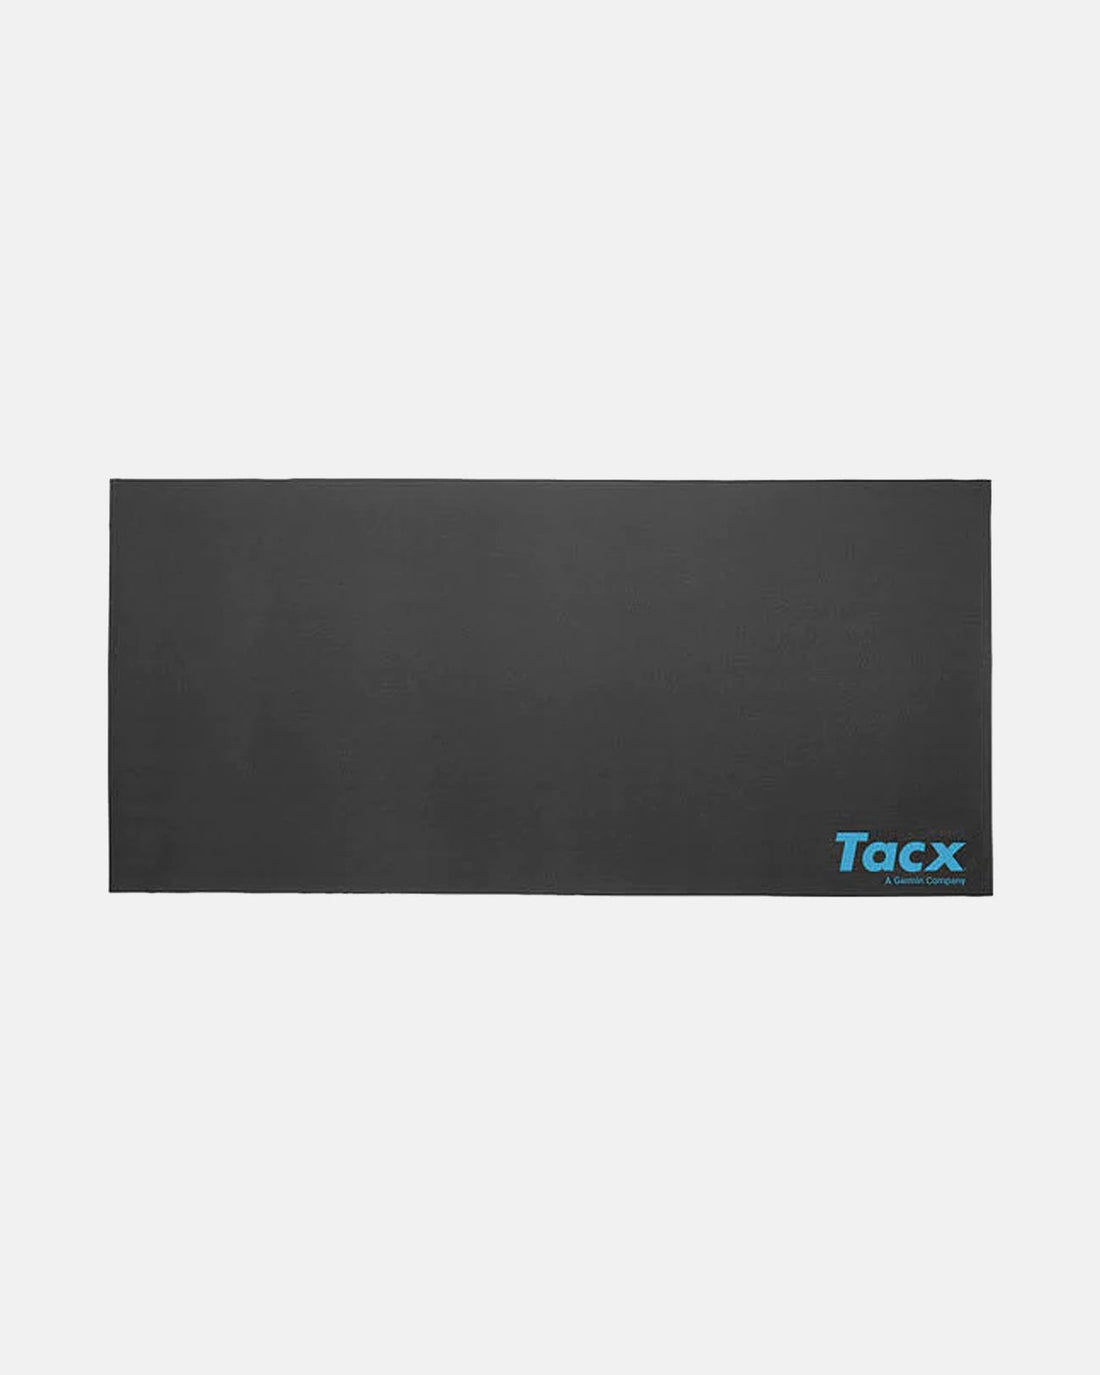 Tacx Rollable Trainer Mat - Tacx